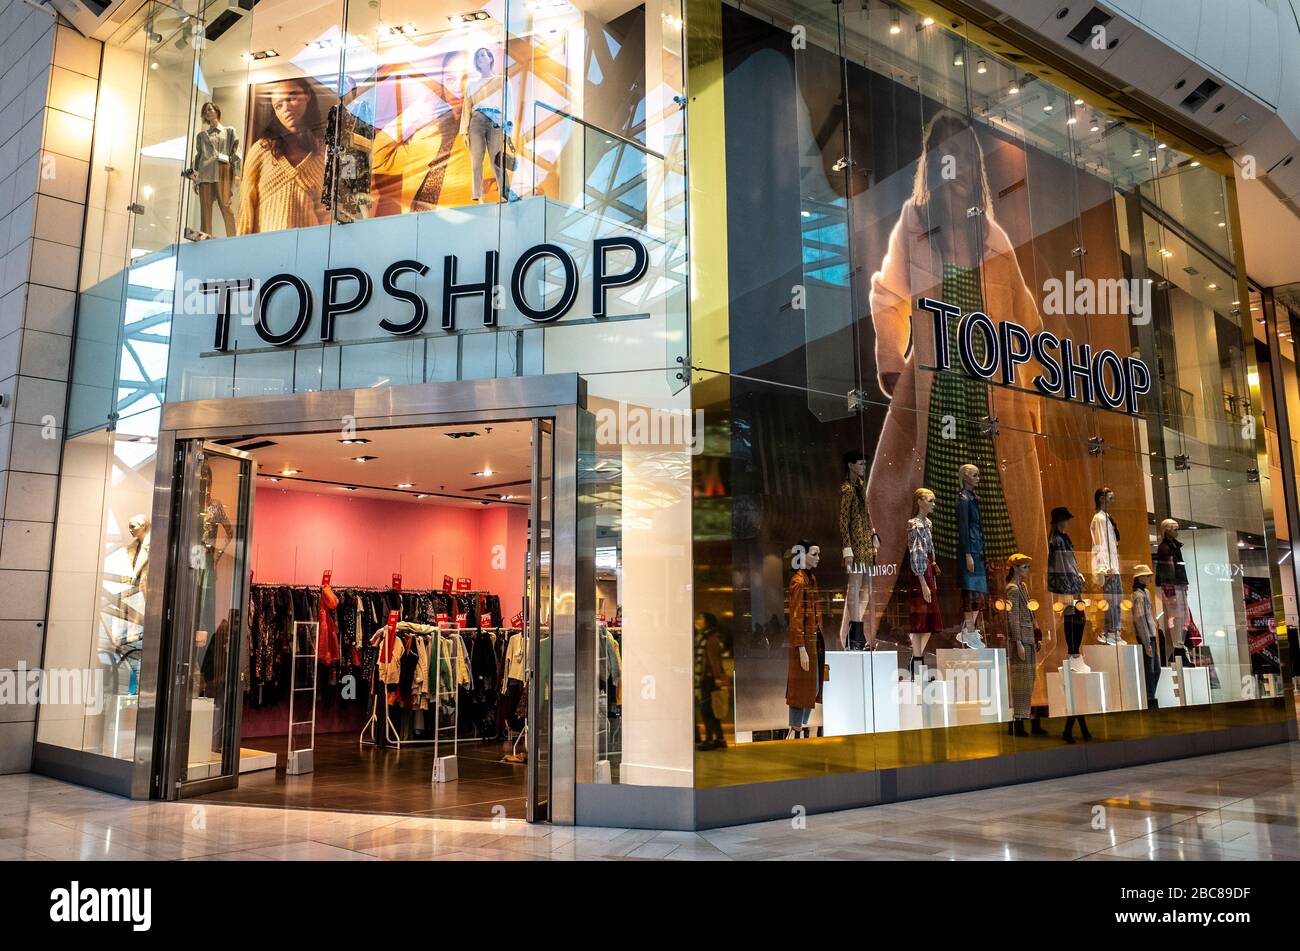 Topshop London High Resolution Stock Photography and Images - Alamy